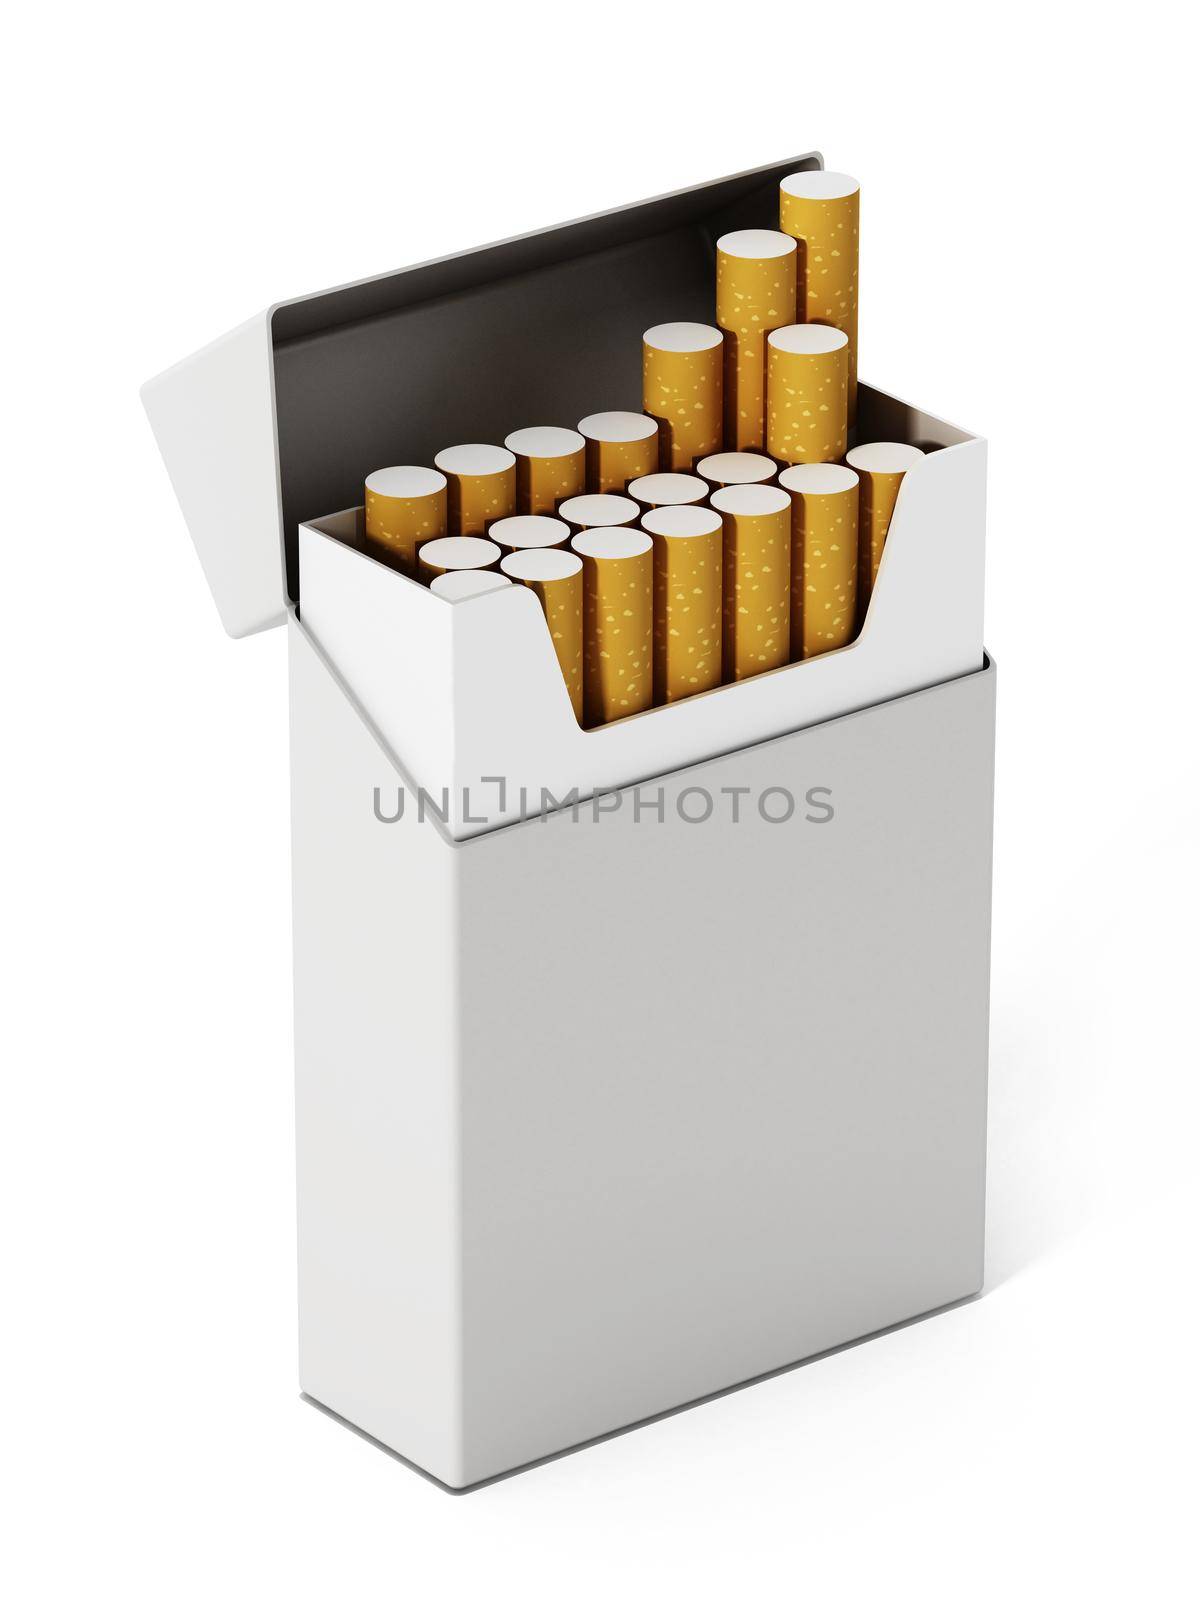 Cigarette box and cigarettes isolated on white background. 3D illustration.